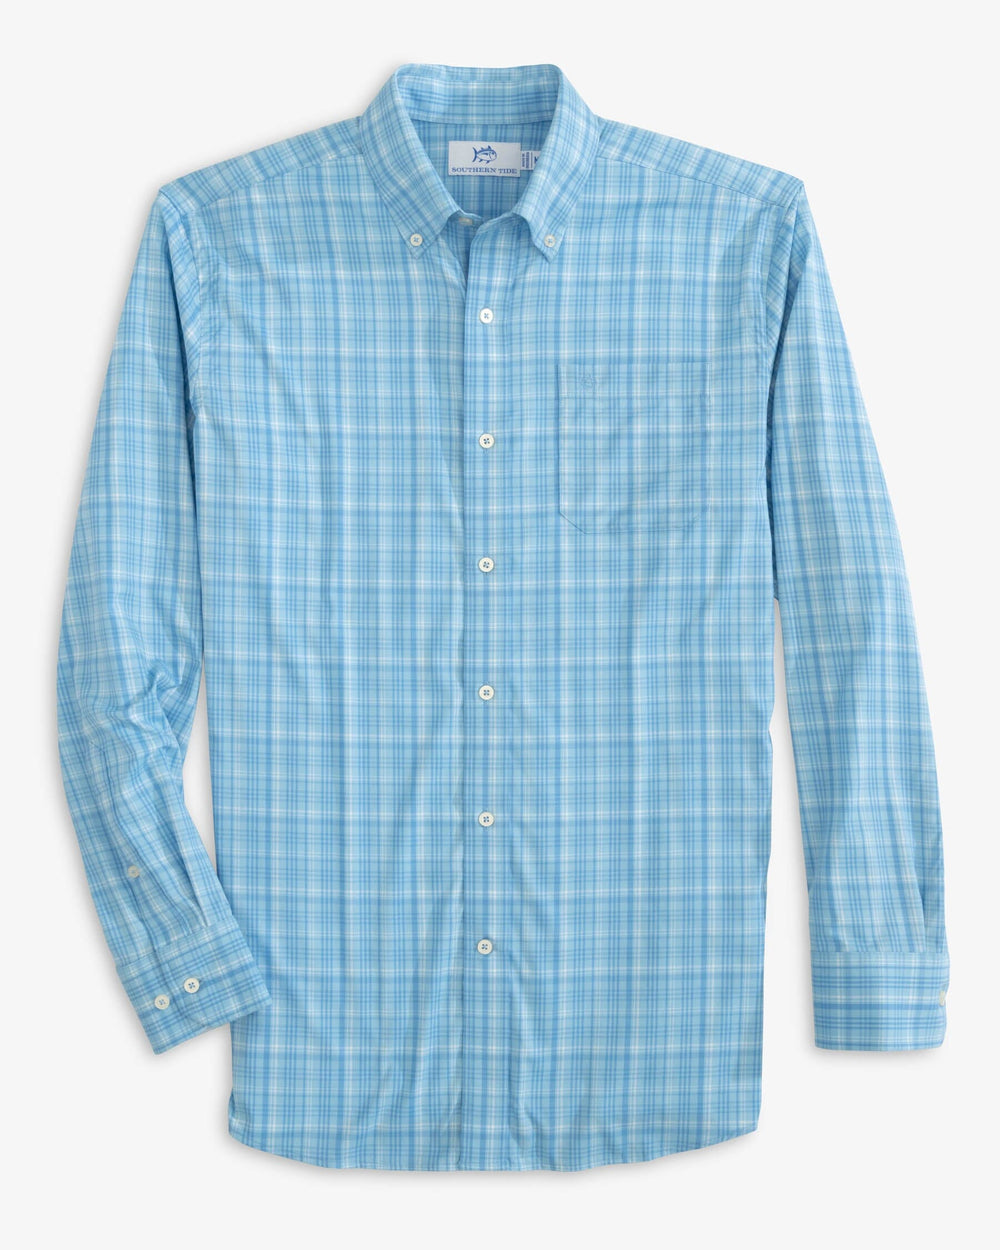 The front view of the Southern Tide Keowee Plaid Intercoastal Sport Shirt by Southern Tide - Rain Water